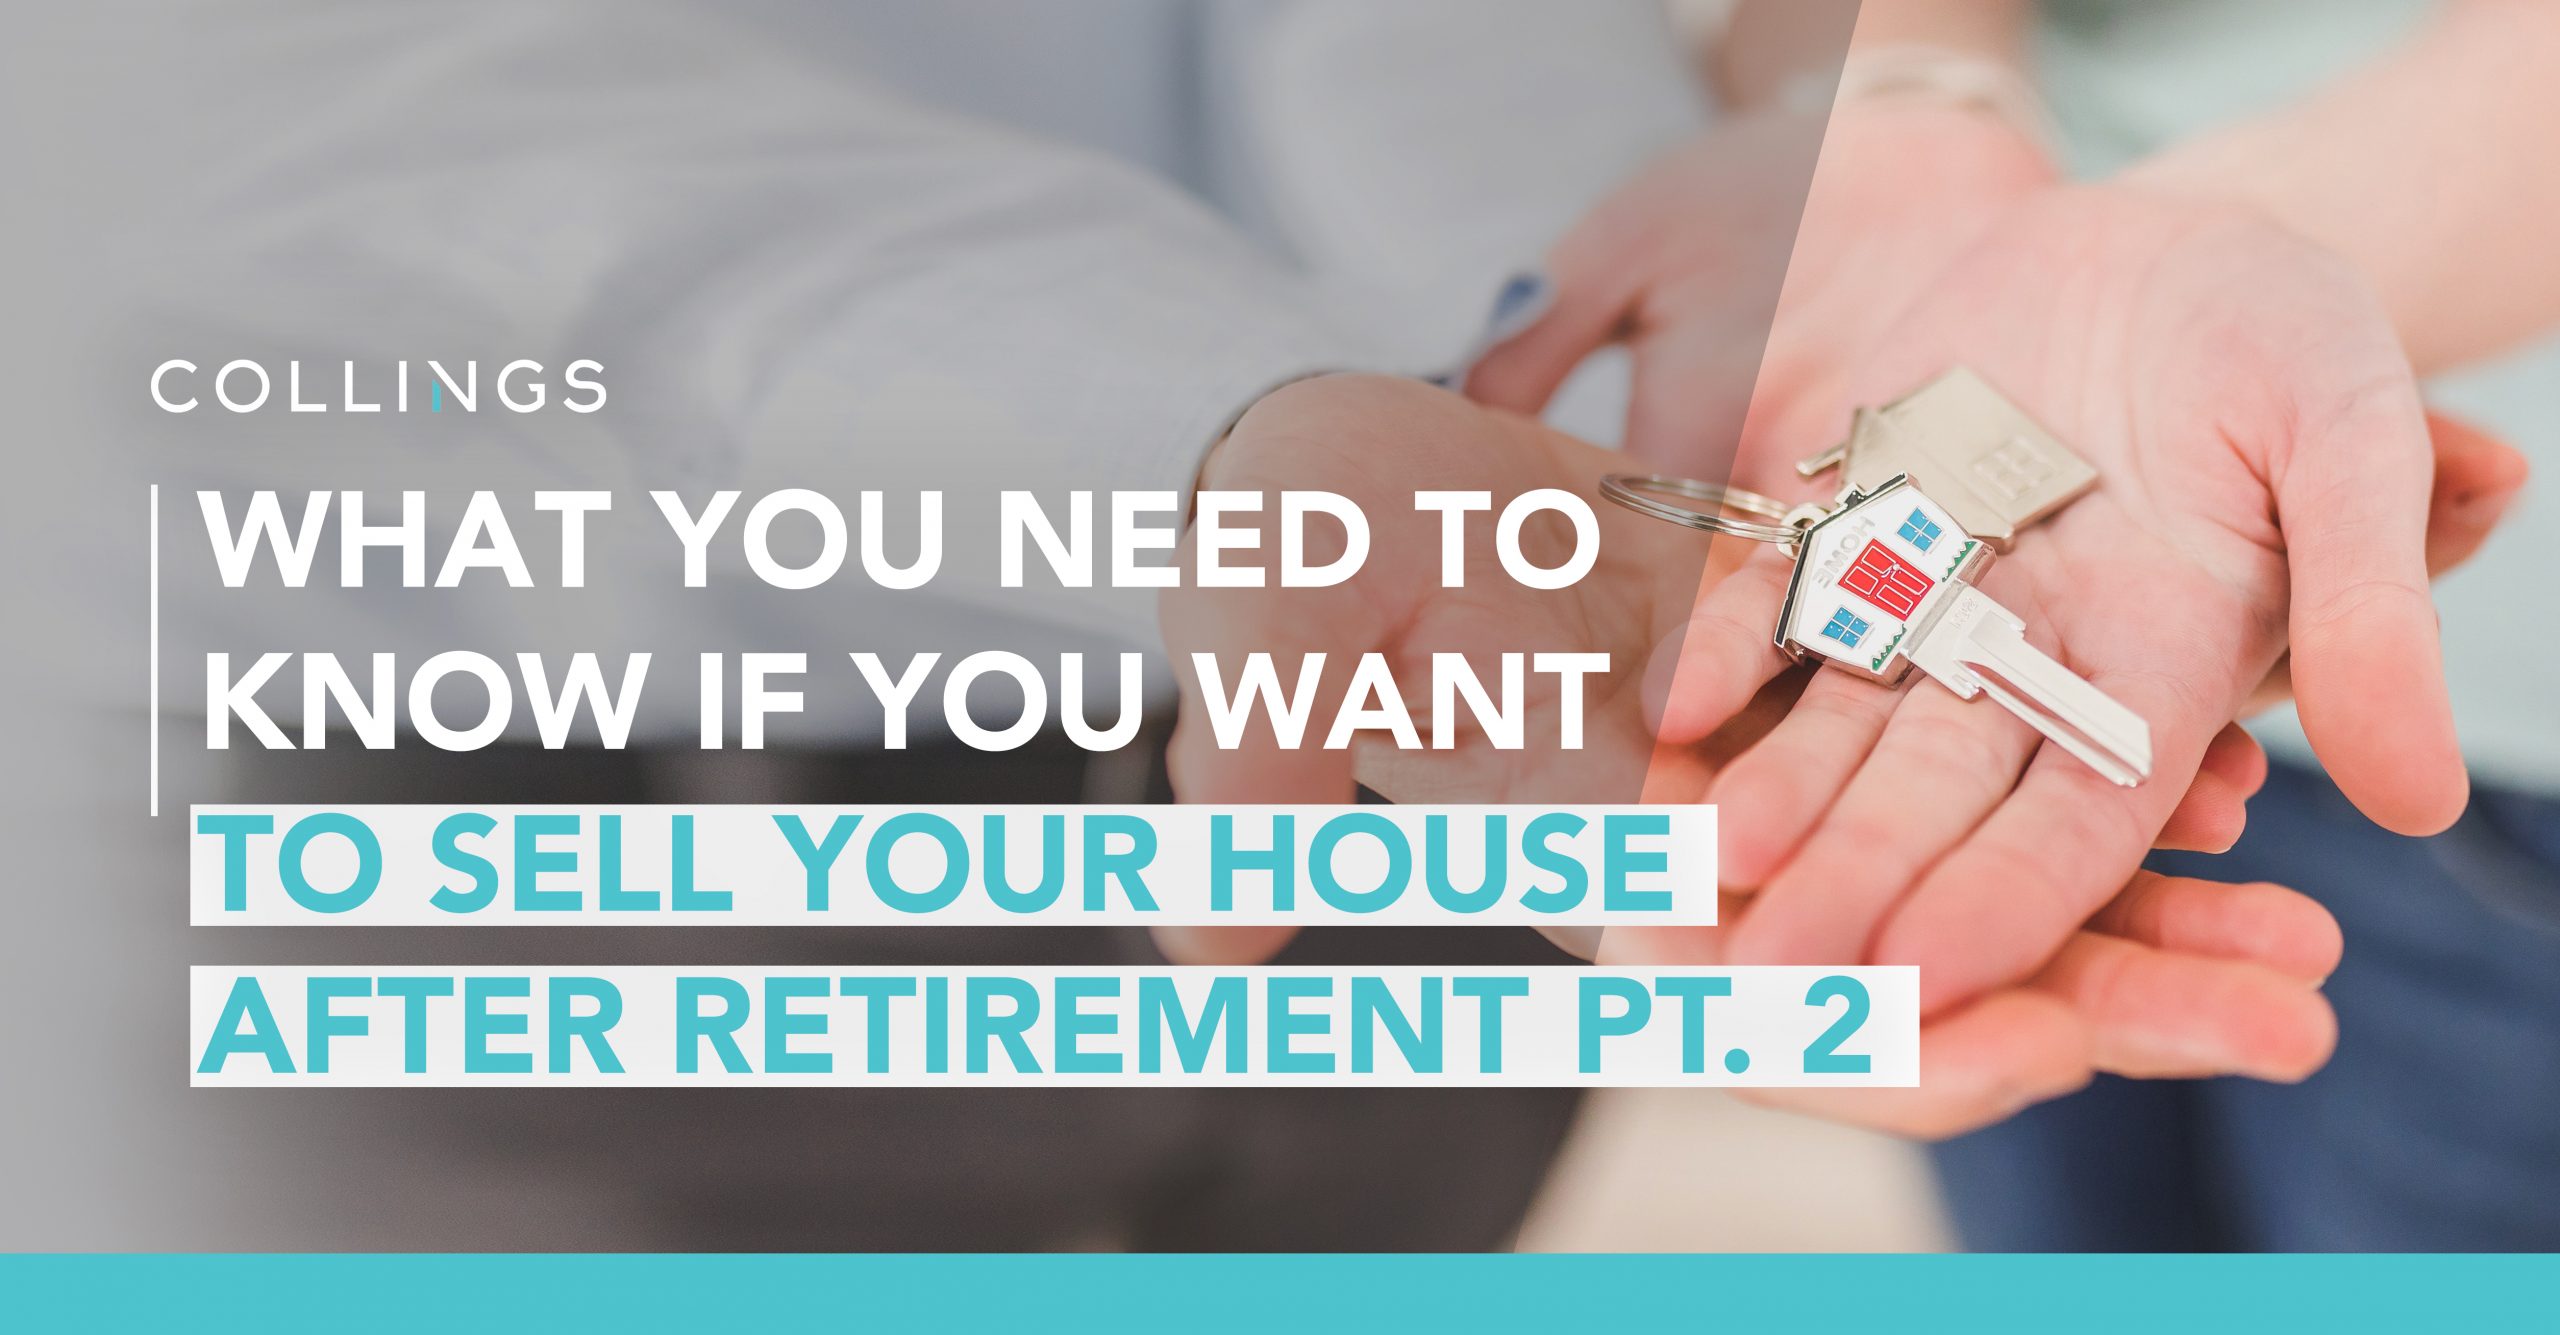 Things You Need to Know If You Want To Sell Your House After Retirement Pt. 2